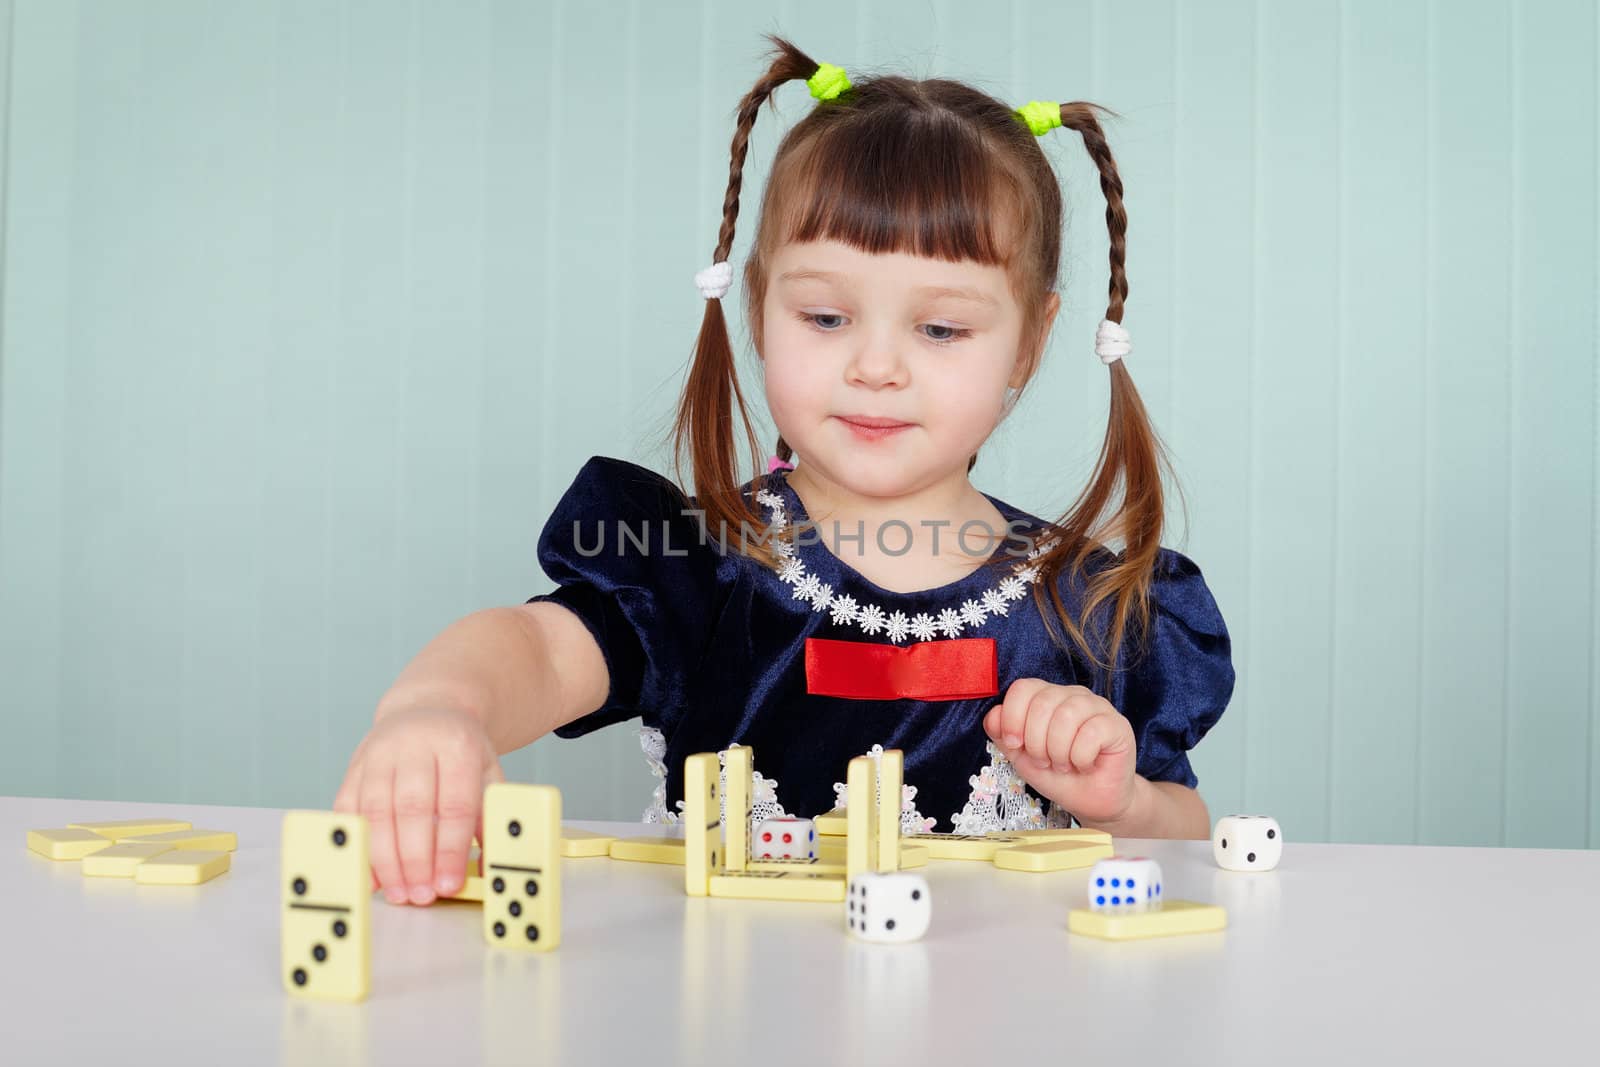 The little girl playing with dominoes sitting at the table